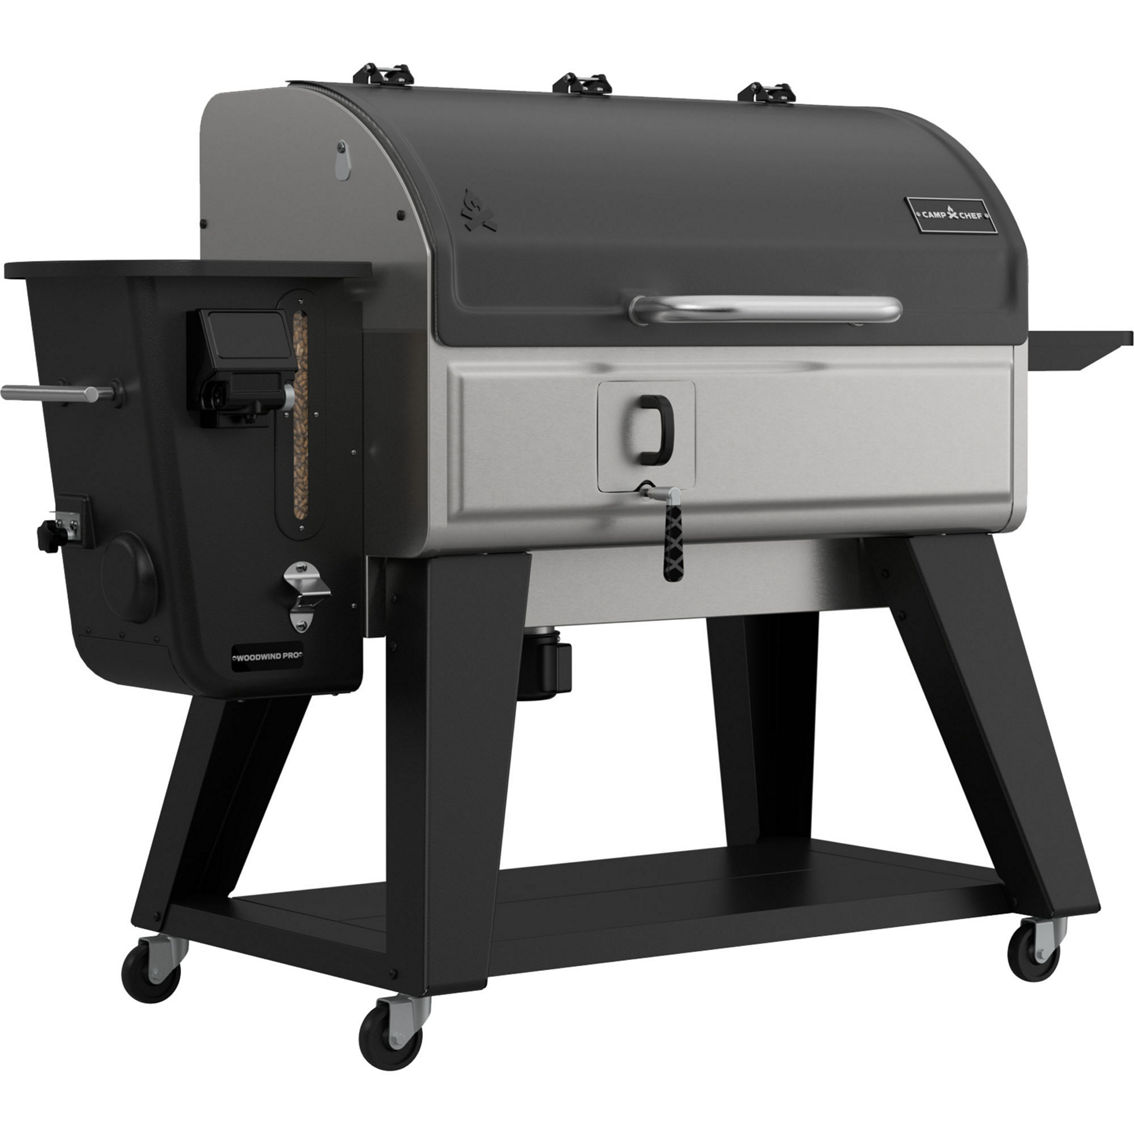 Camp Chef Woodwind Pro WiFi 36 Pellet Grill - Image 2 of 8